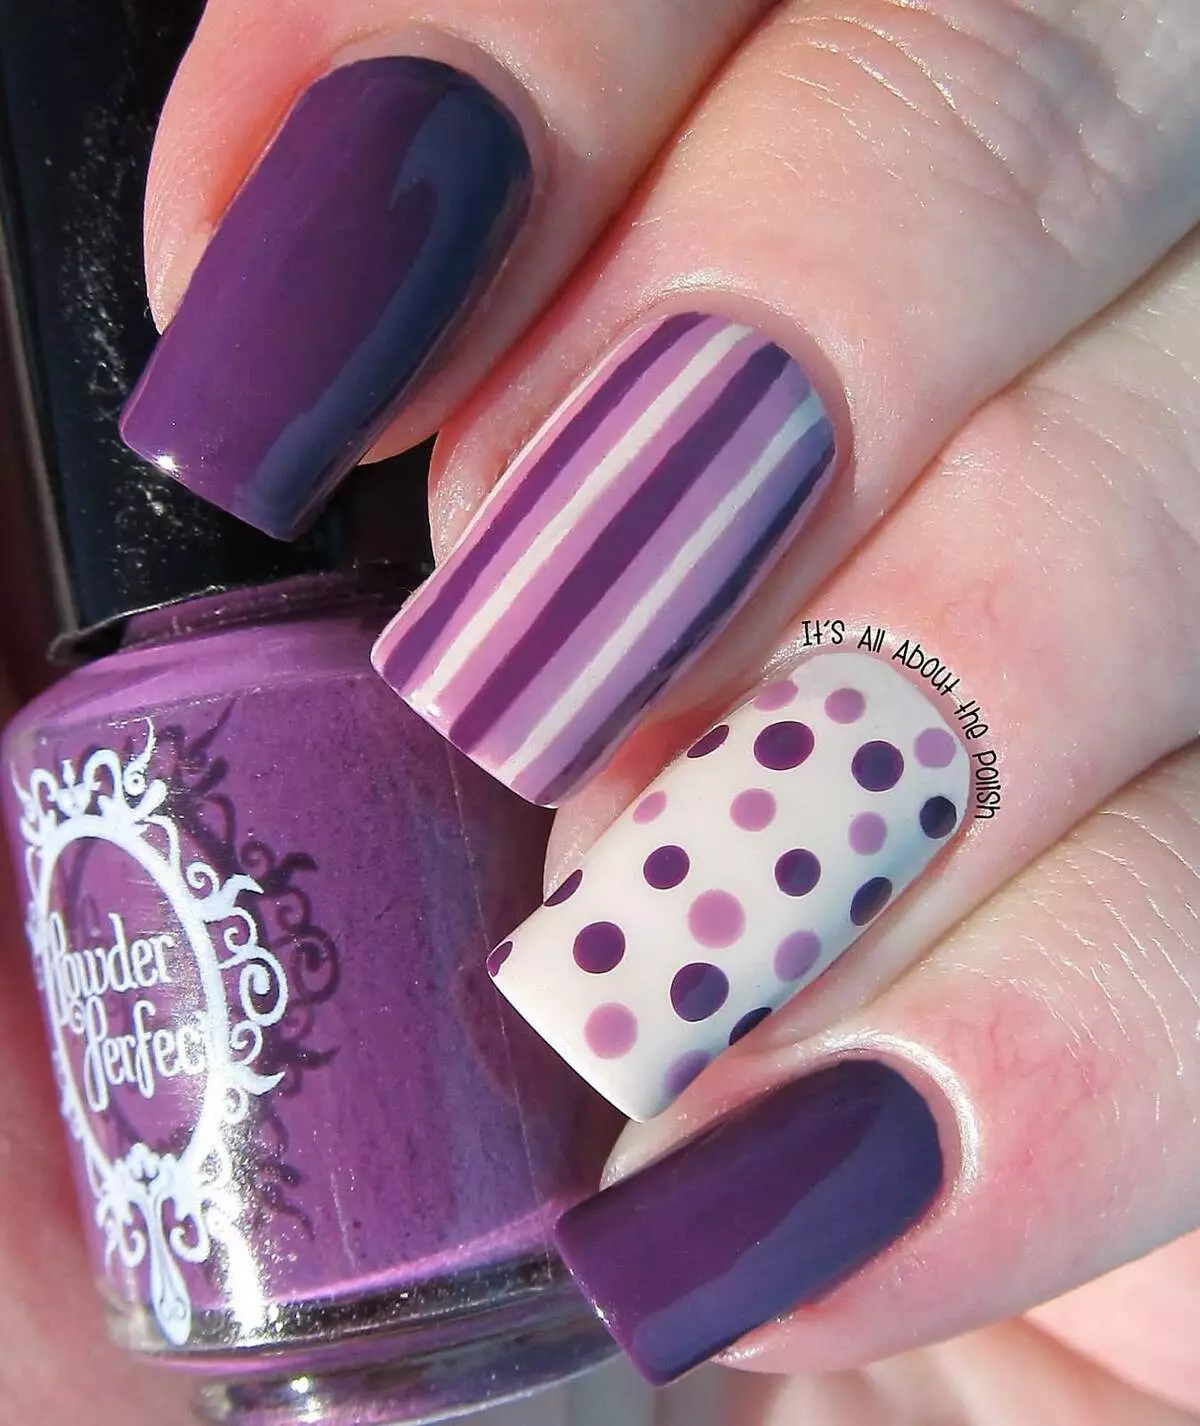 Design of lilac nails (63 photos): Ideas for a lilac color manicure with sparkles, rhinestones and pattern 17252_53